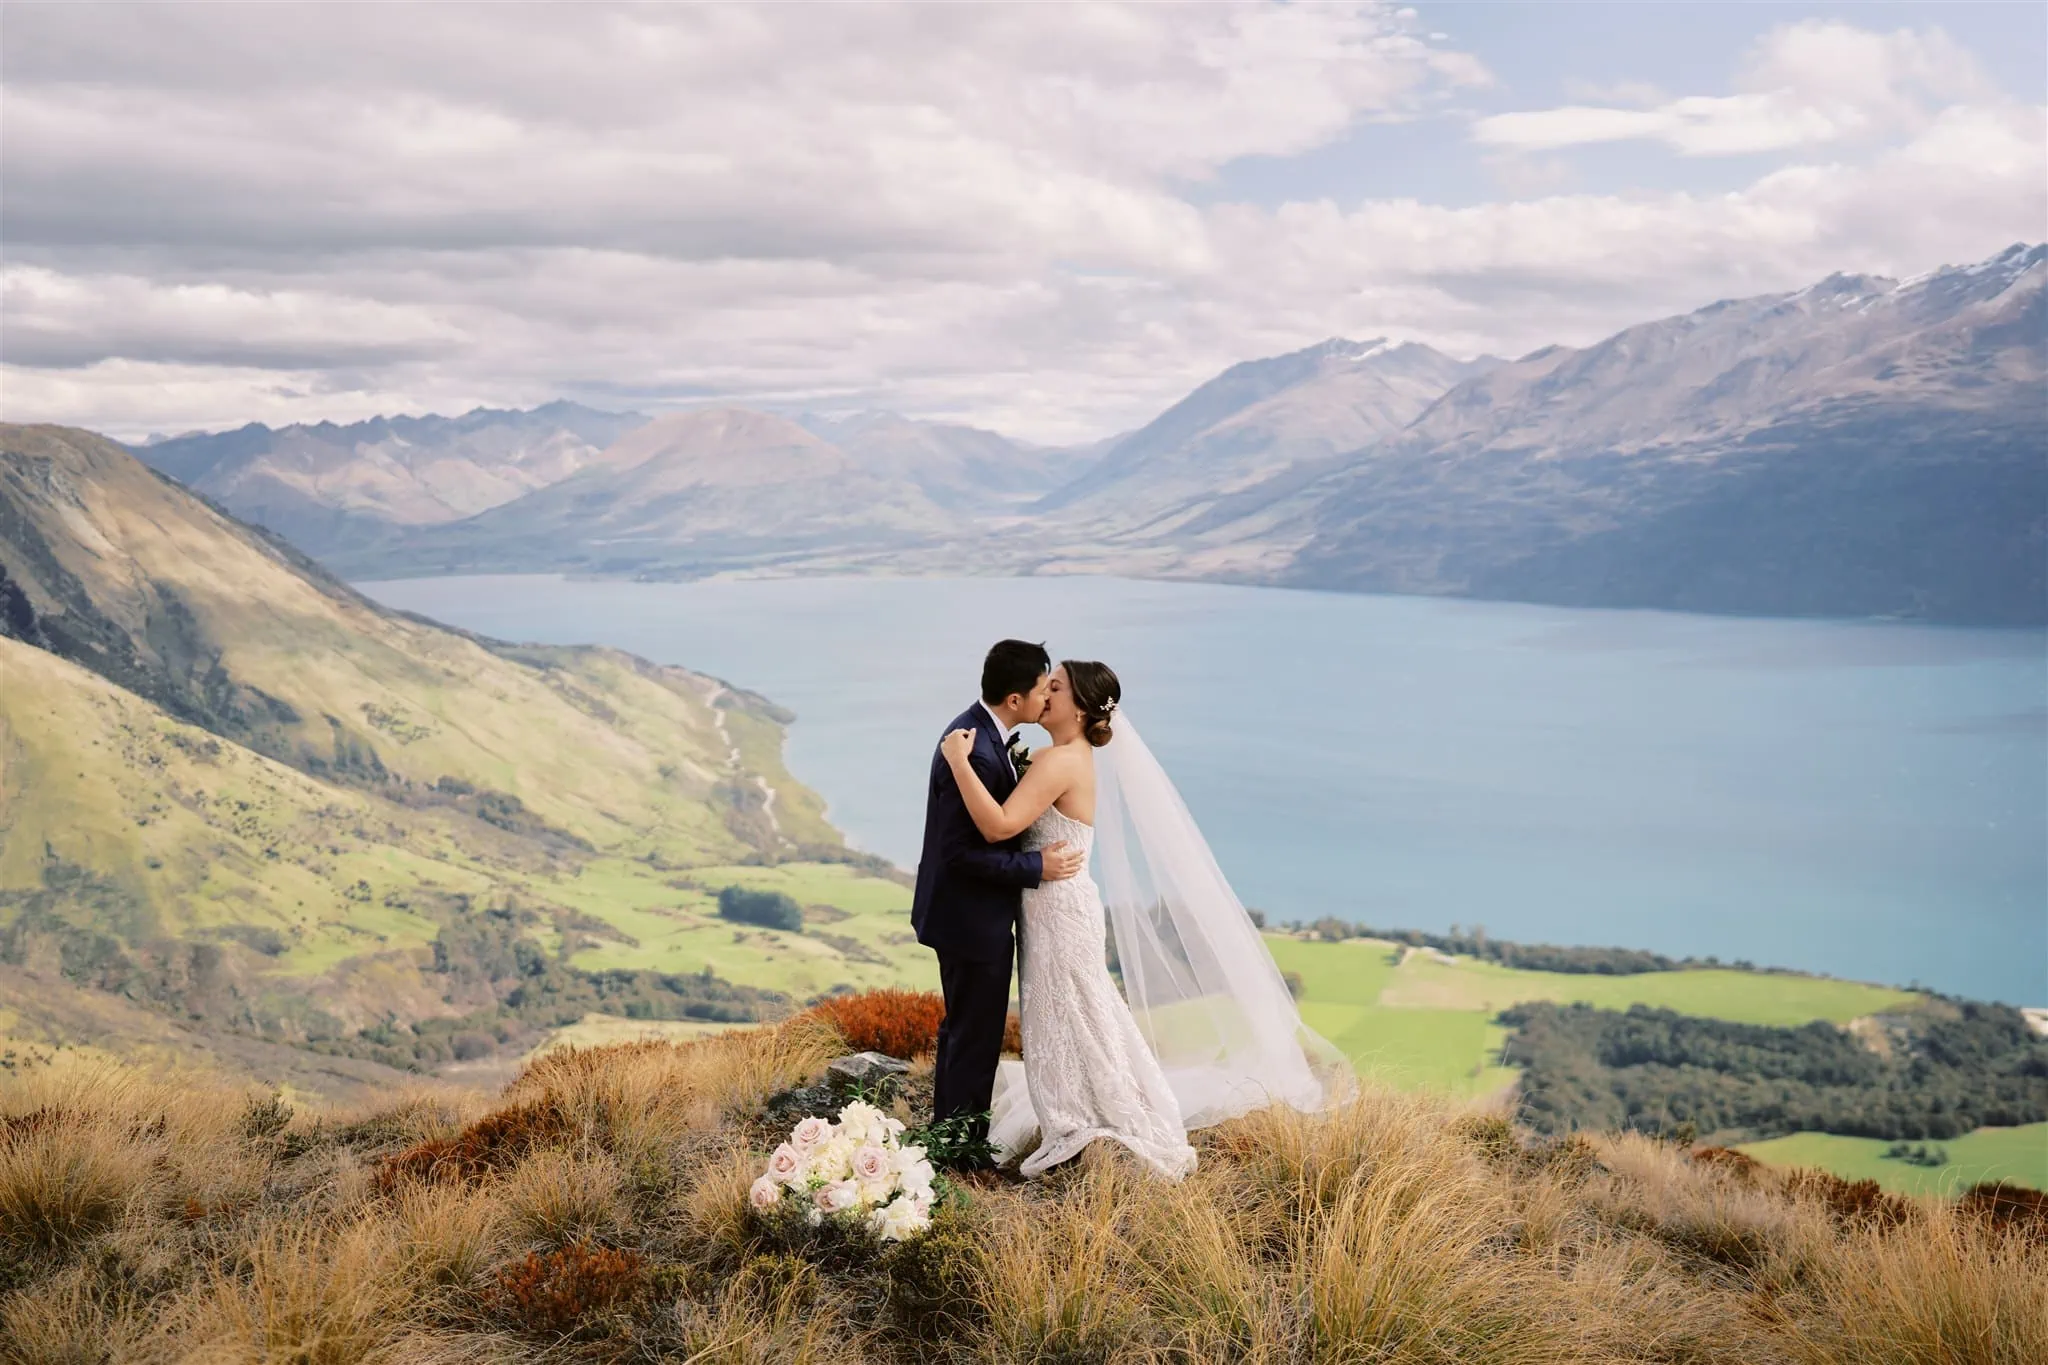 Queenstown Elopement Heli Wedding Photographer クイーンズタウン結婚式 | A bride and groom embarking on an epic journey as they elope, standing on top of a mountain overlooking Lake Wanaka in Queenstown.